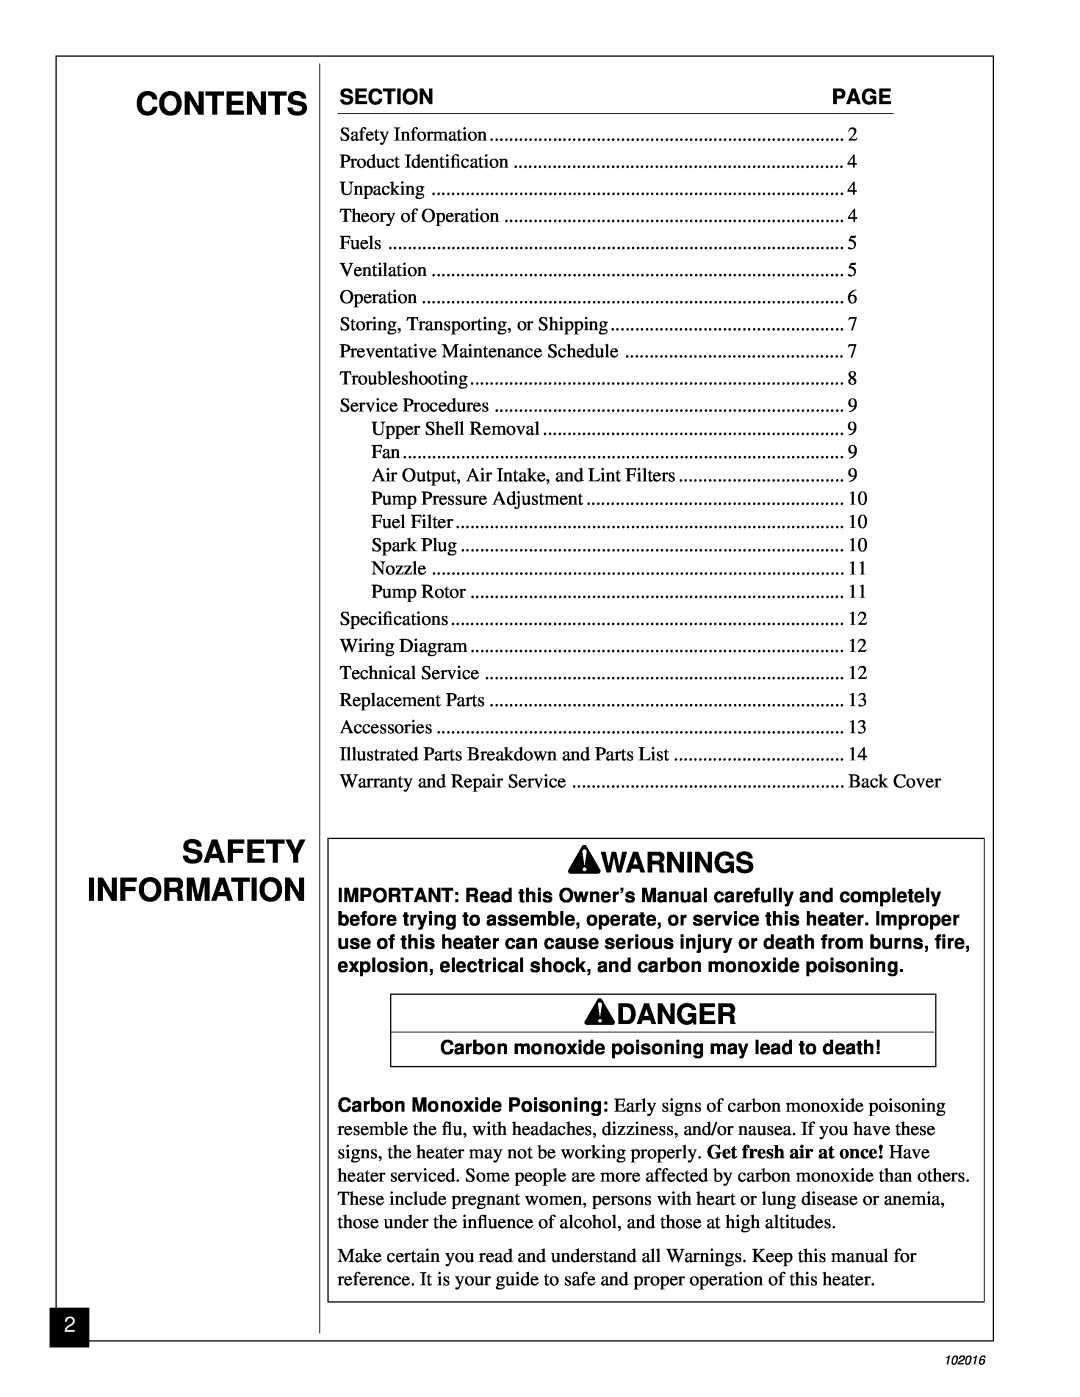 Desa REM50B Contents, Safety Information, Warnings, Danger, Section, Page, Carbon monoxide poisoning may lead to death 